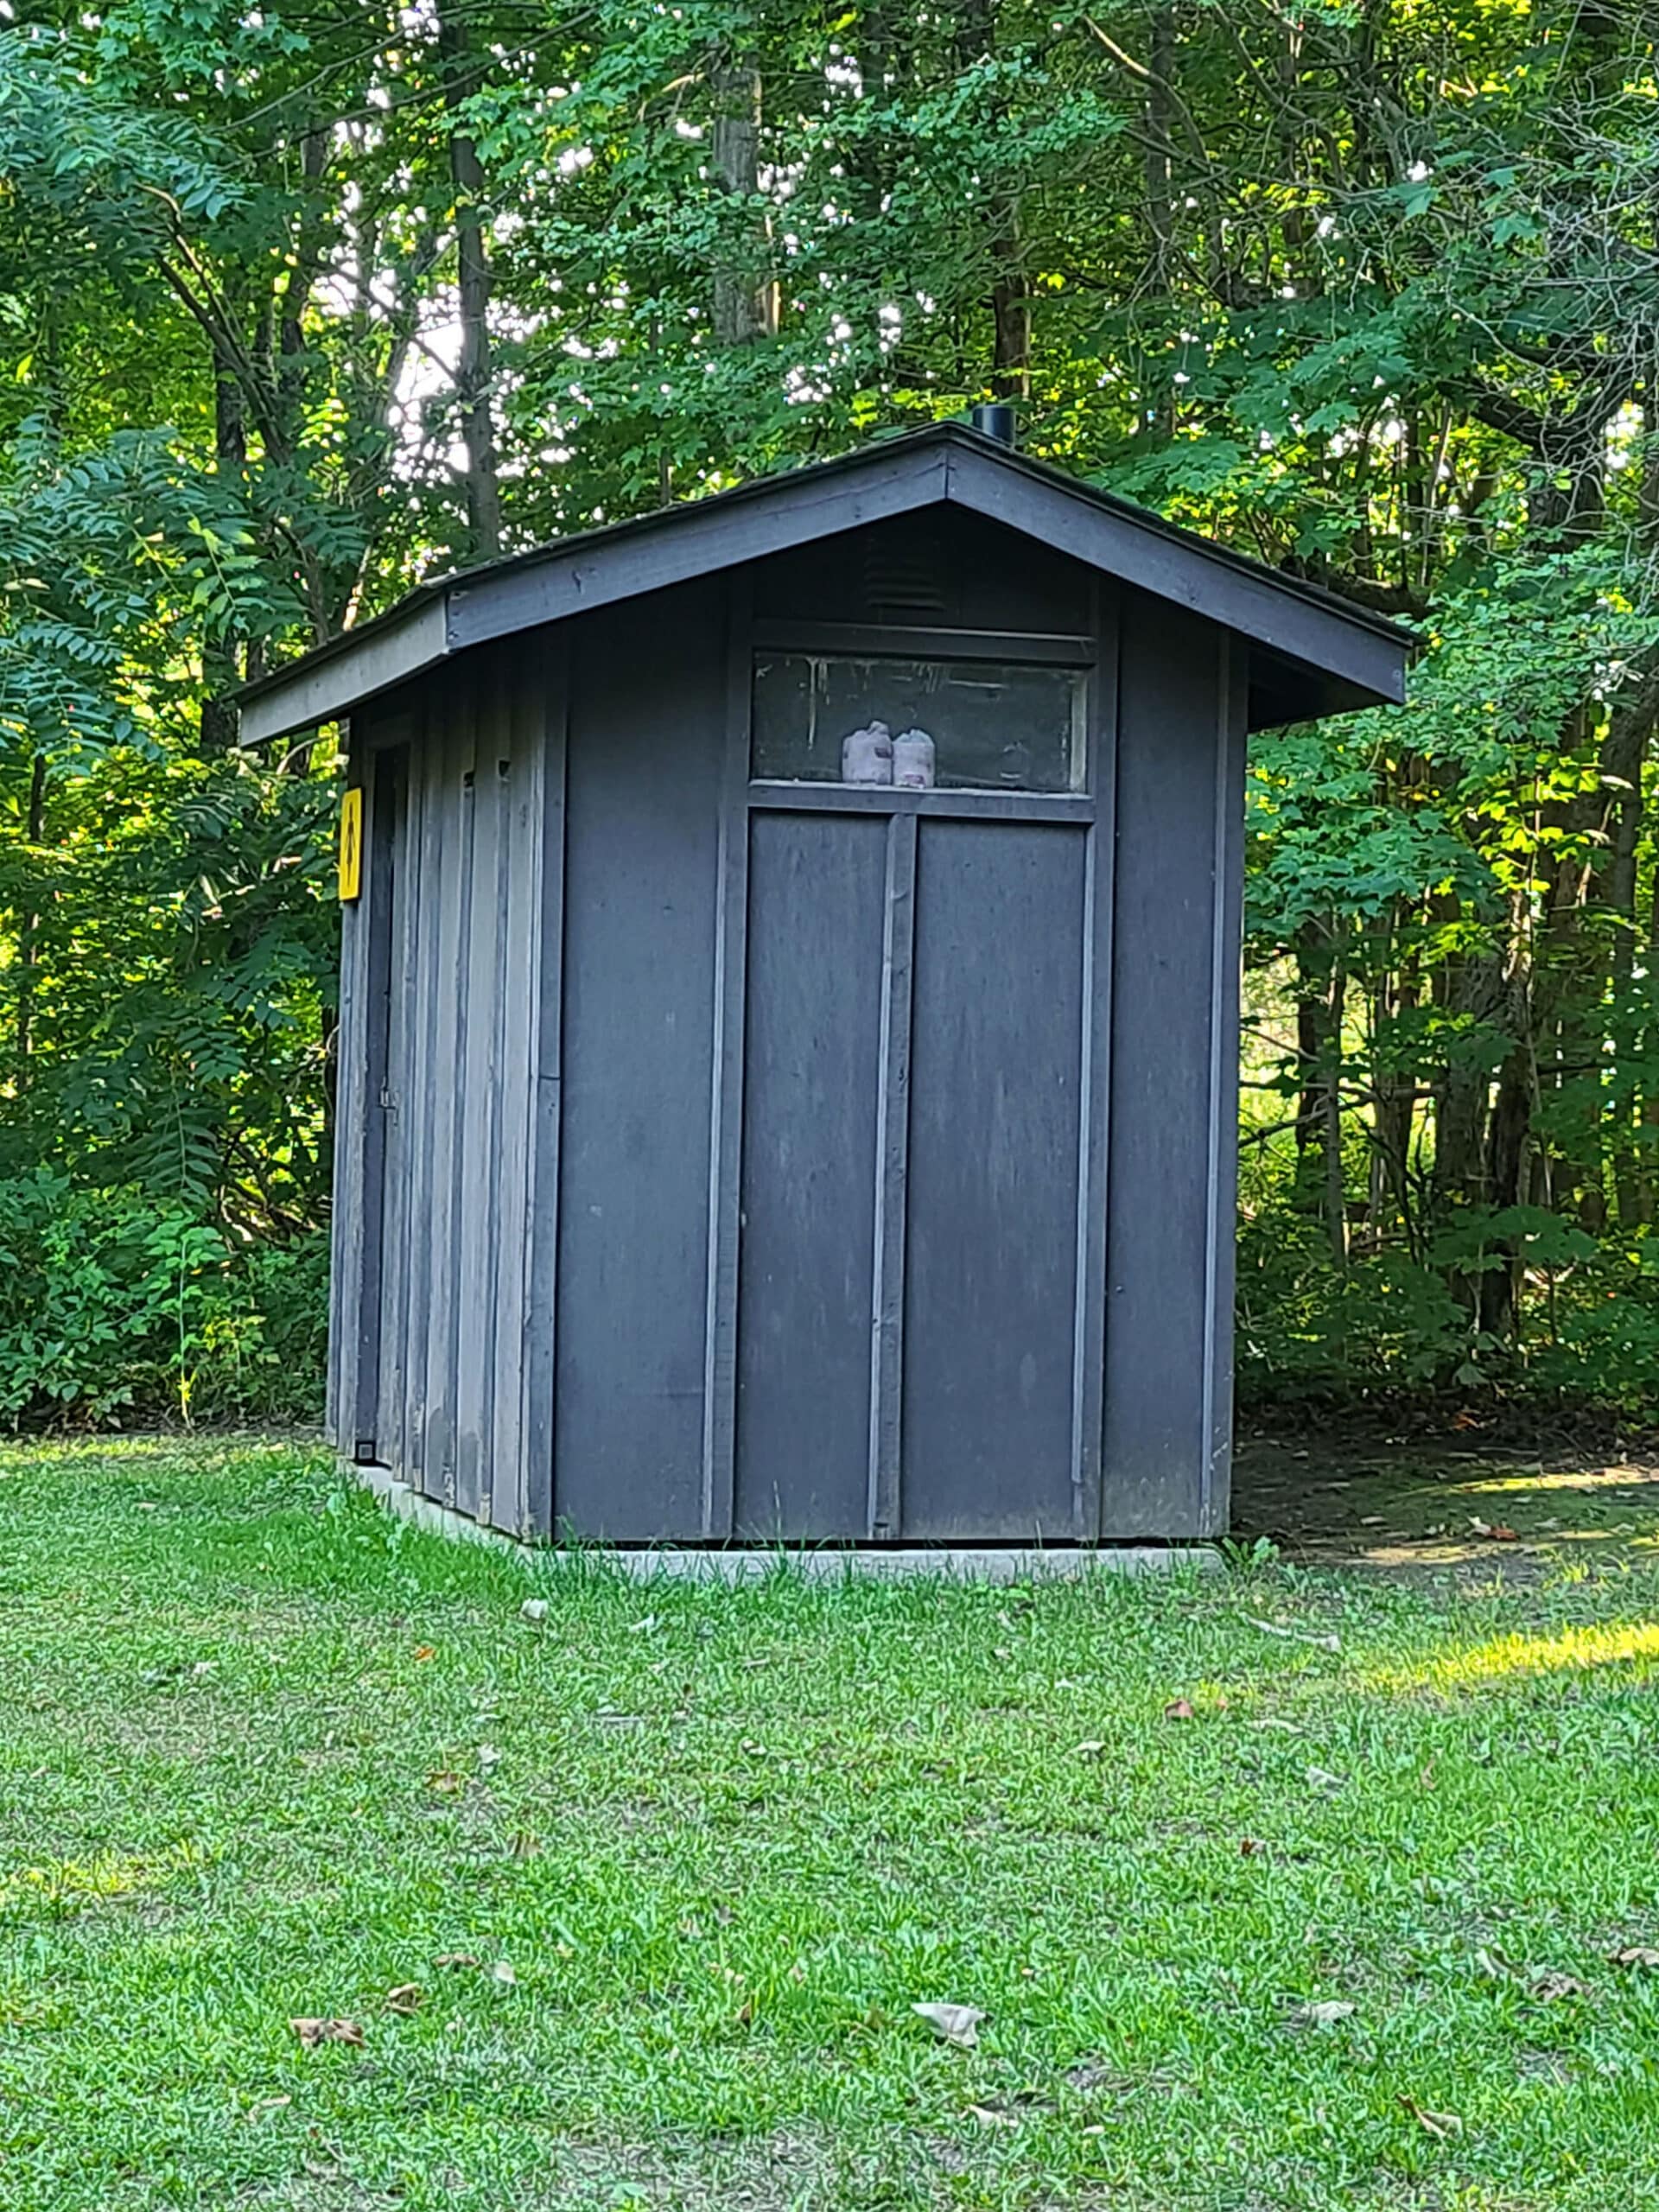 An outhouse in front of the woods.